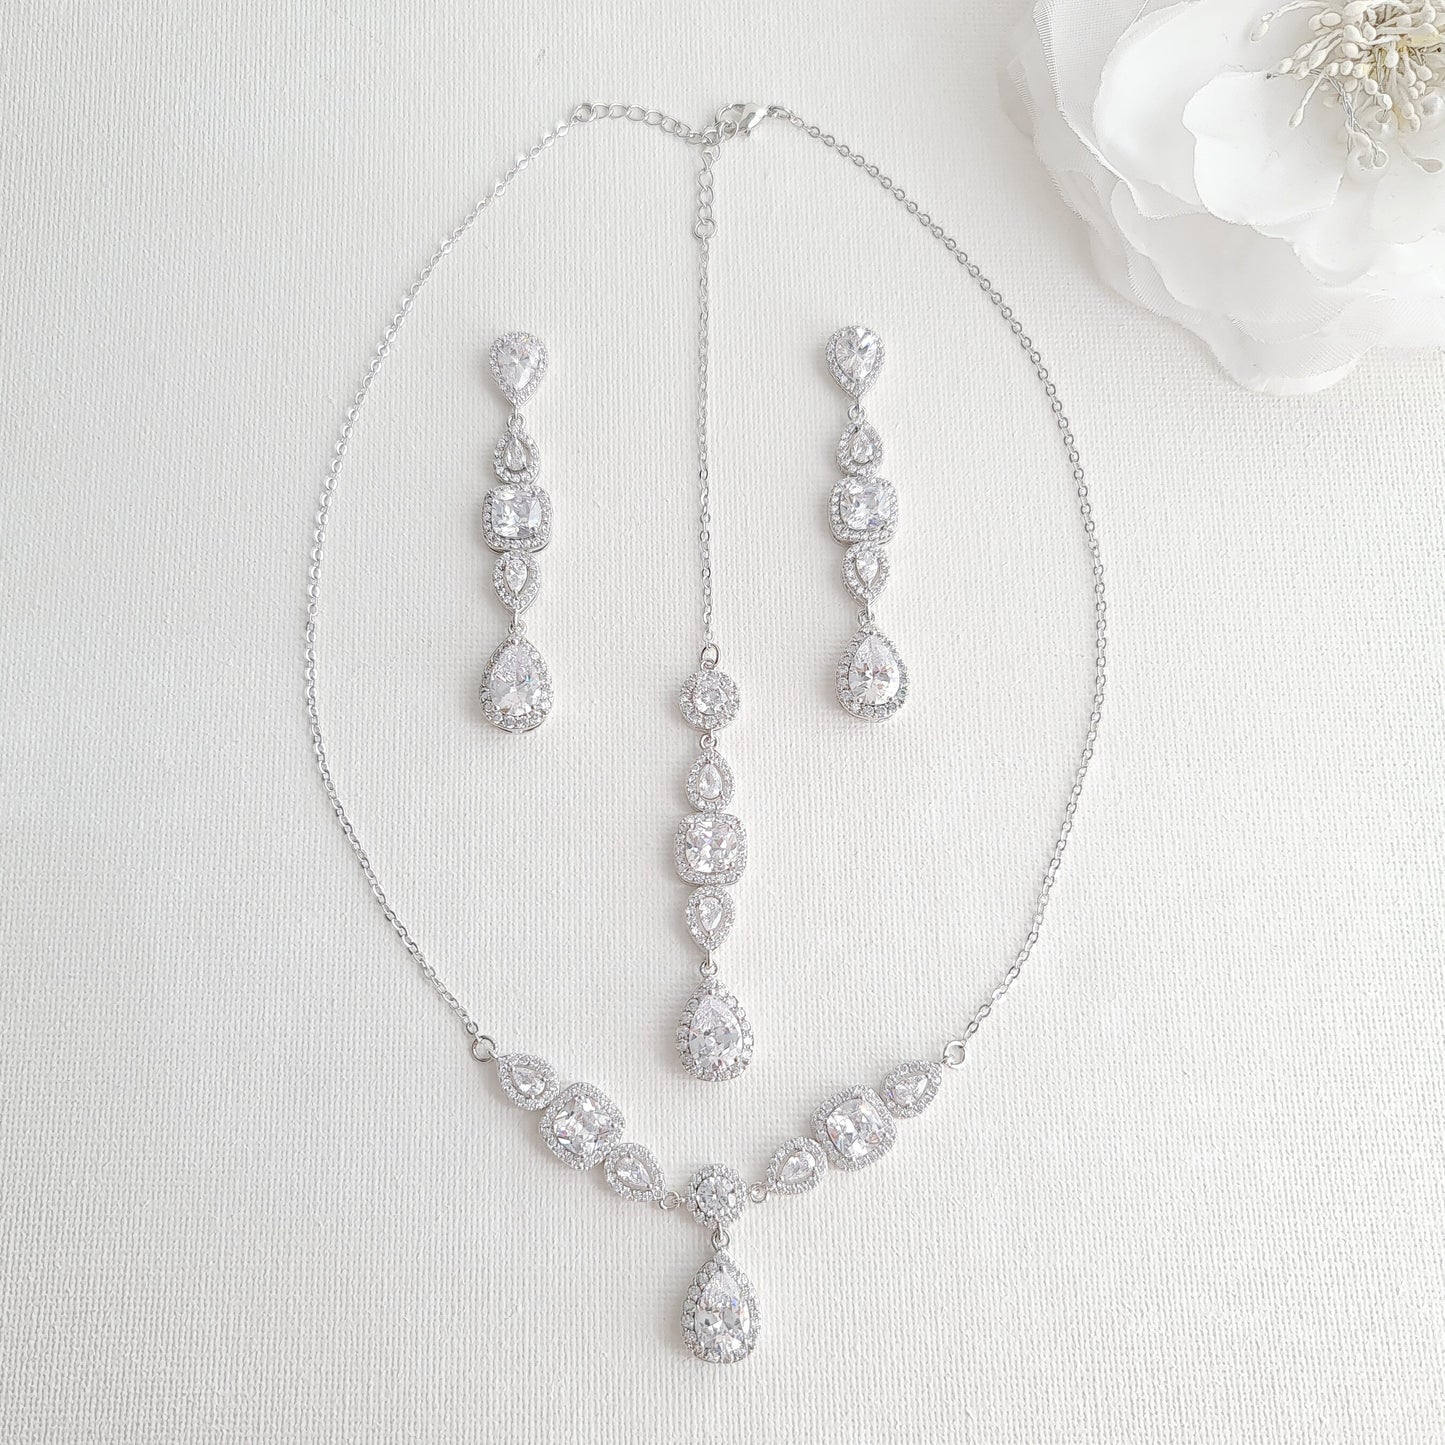 Necklace Set for Brides in Rose Gold- Gianna